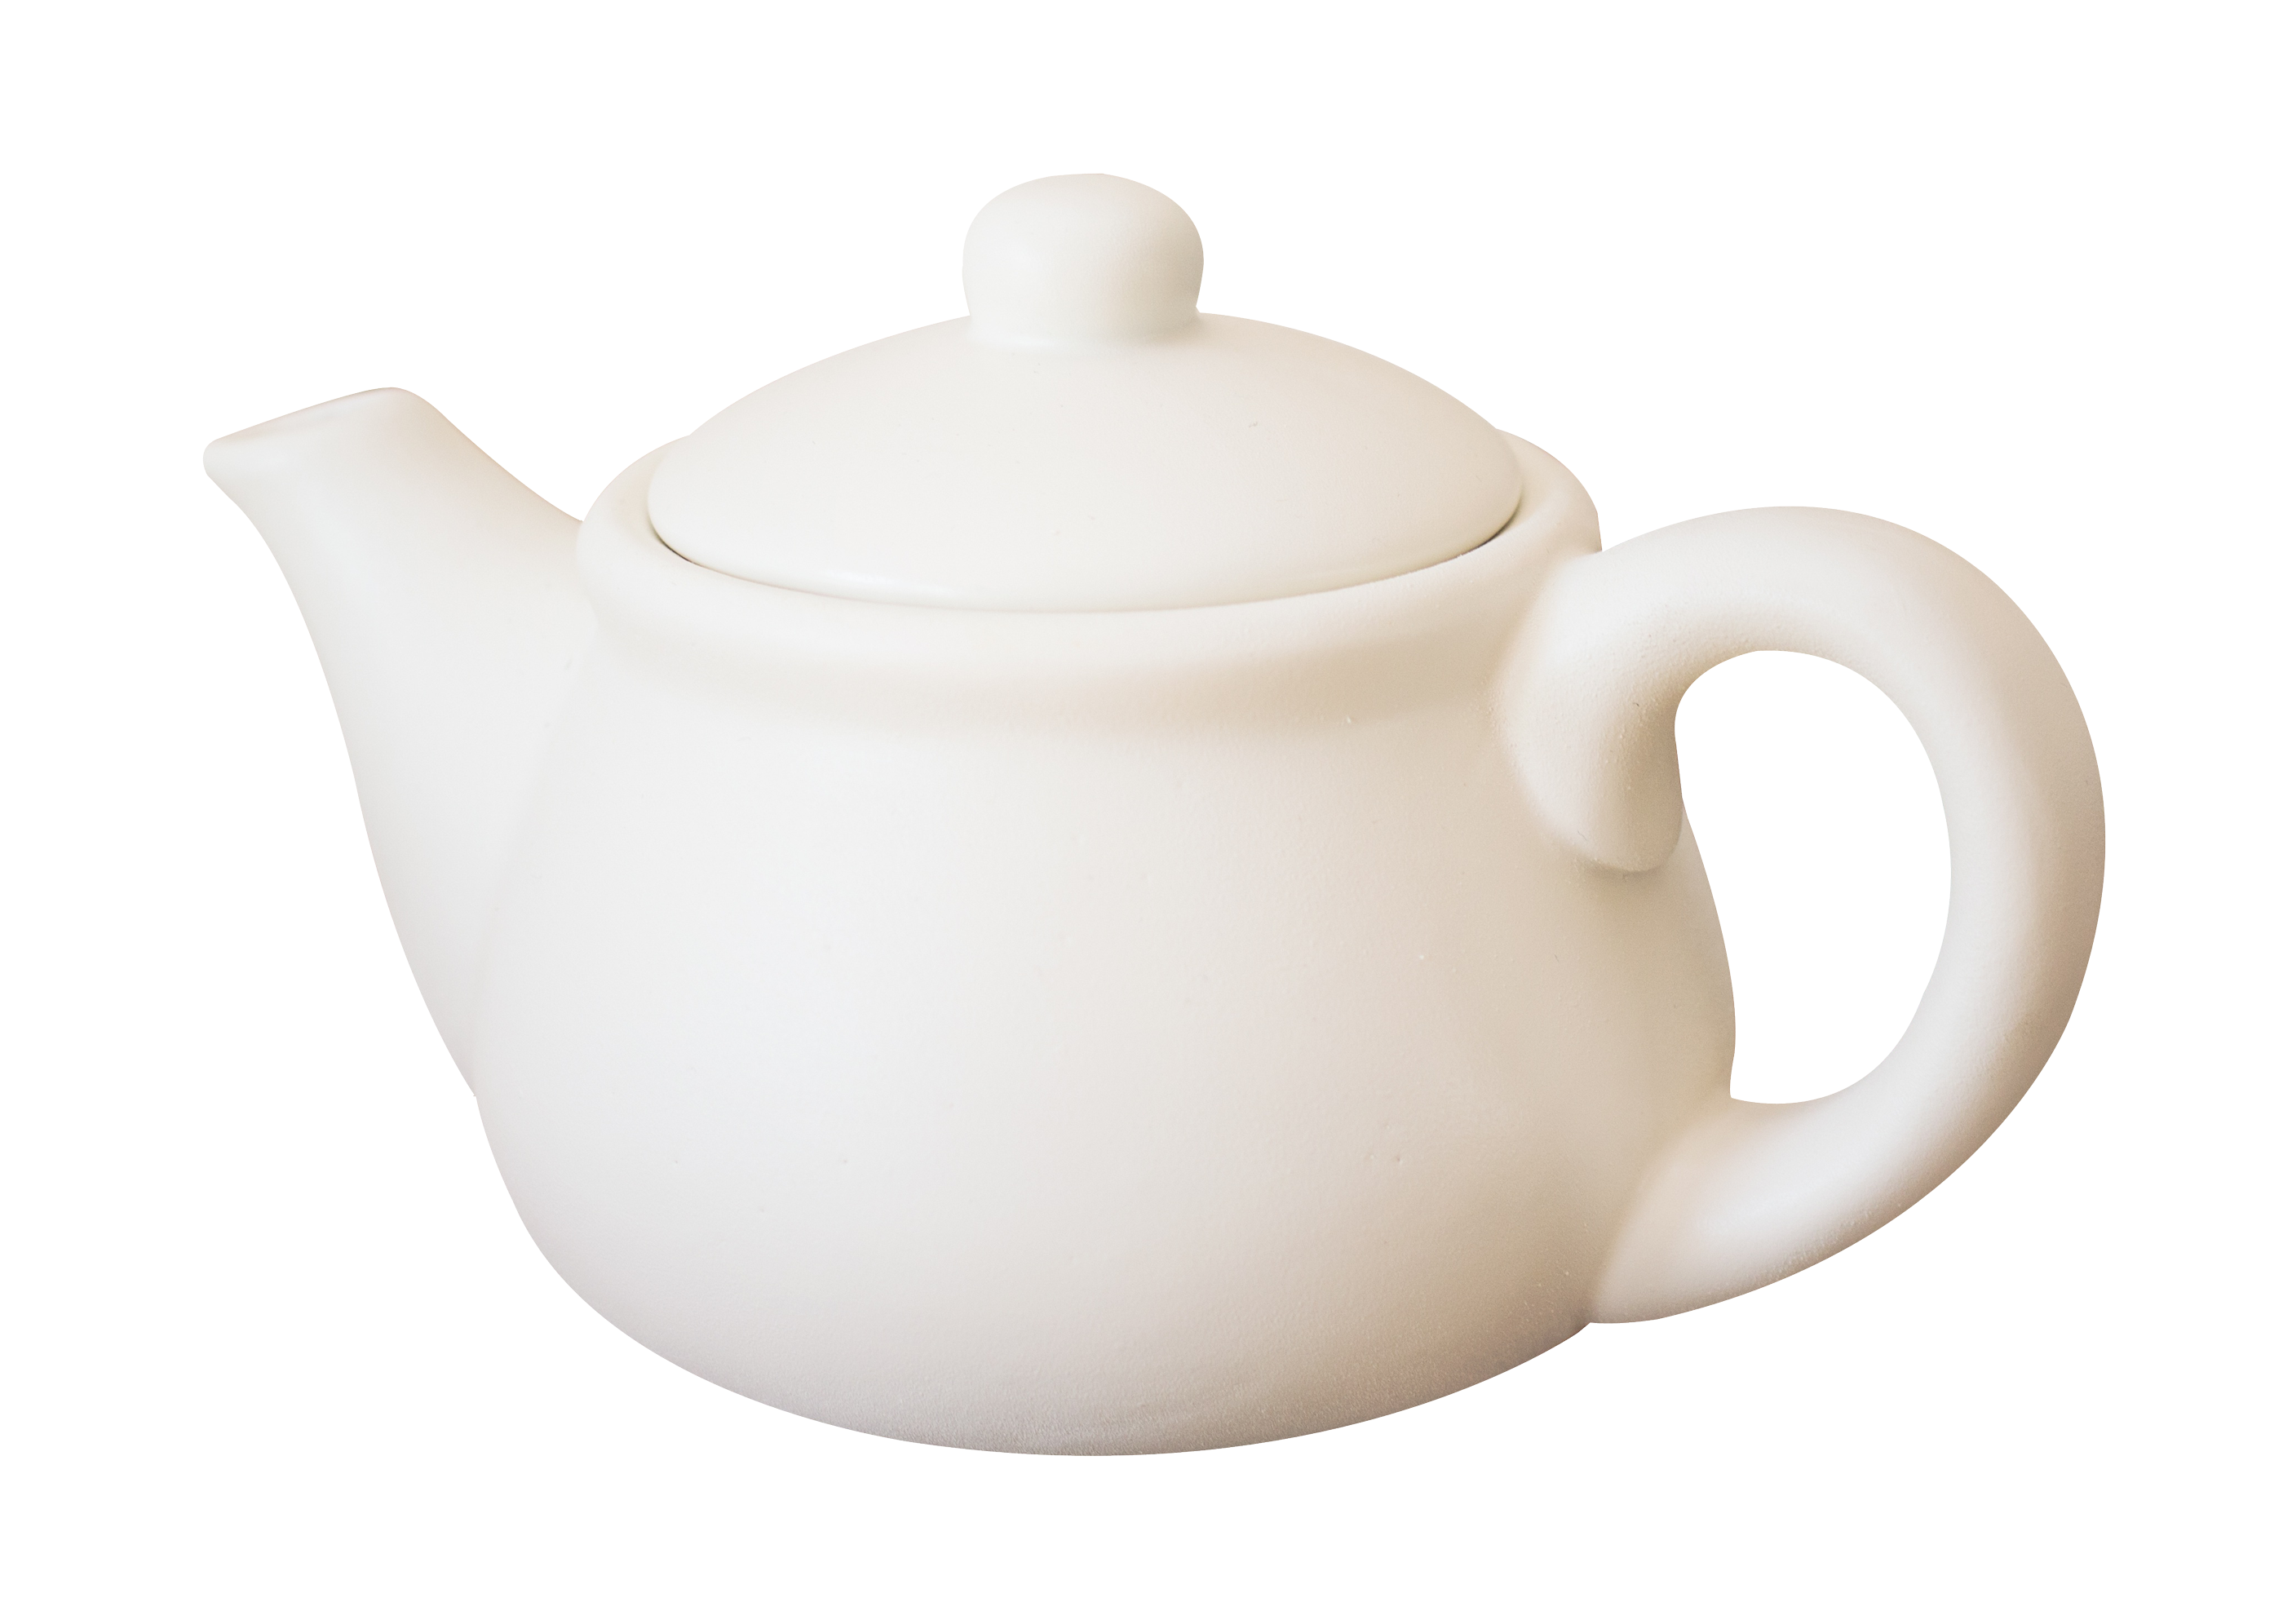 A White Teapot With A Lid